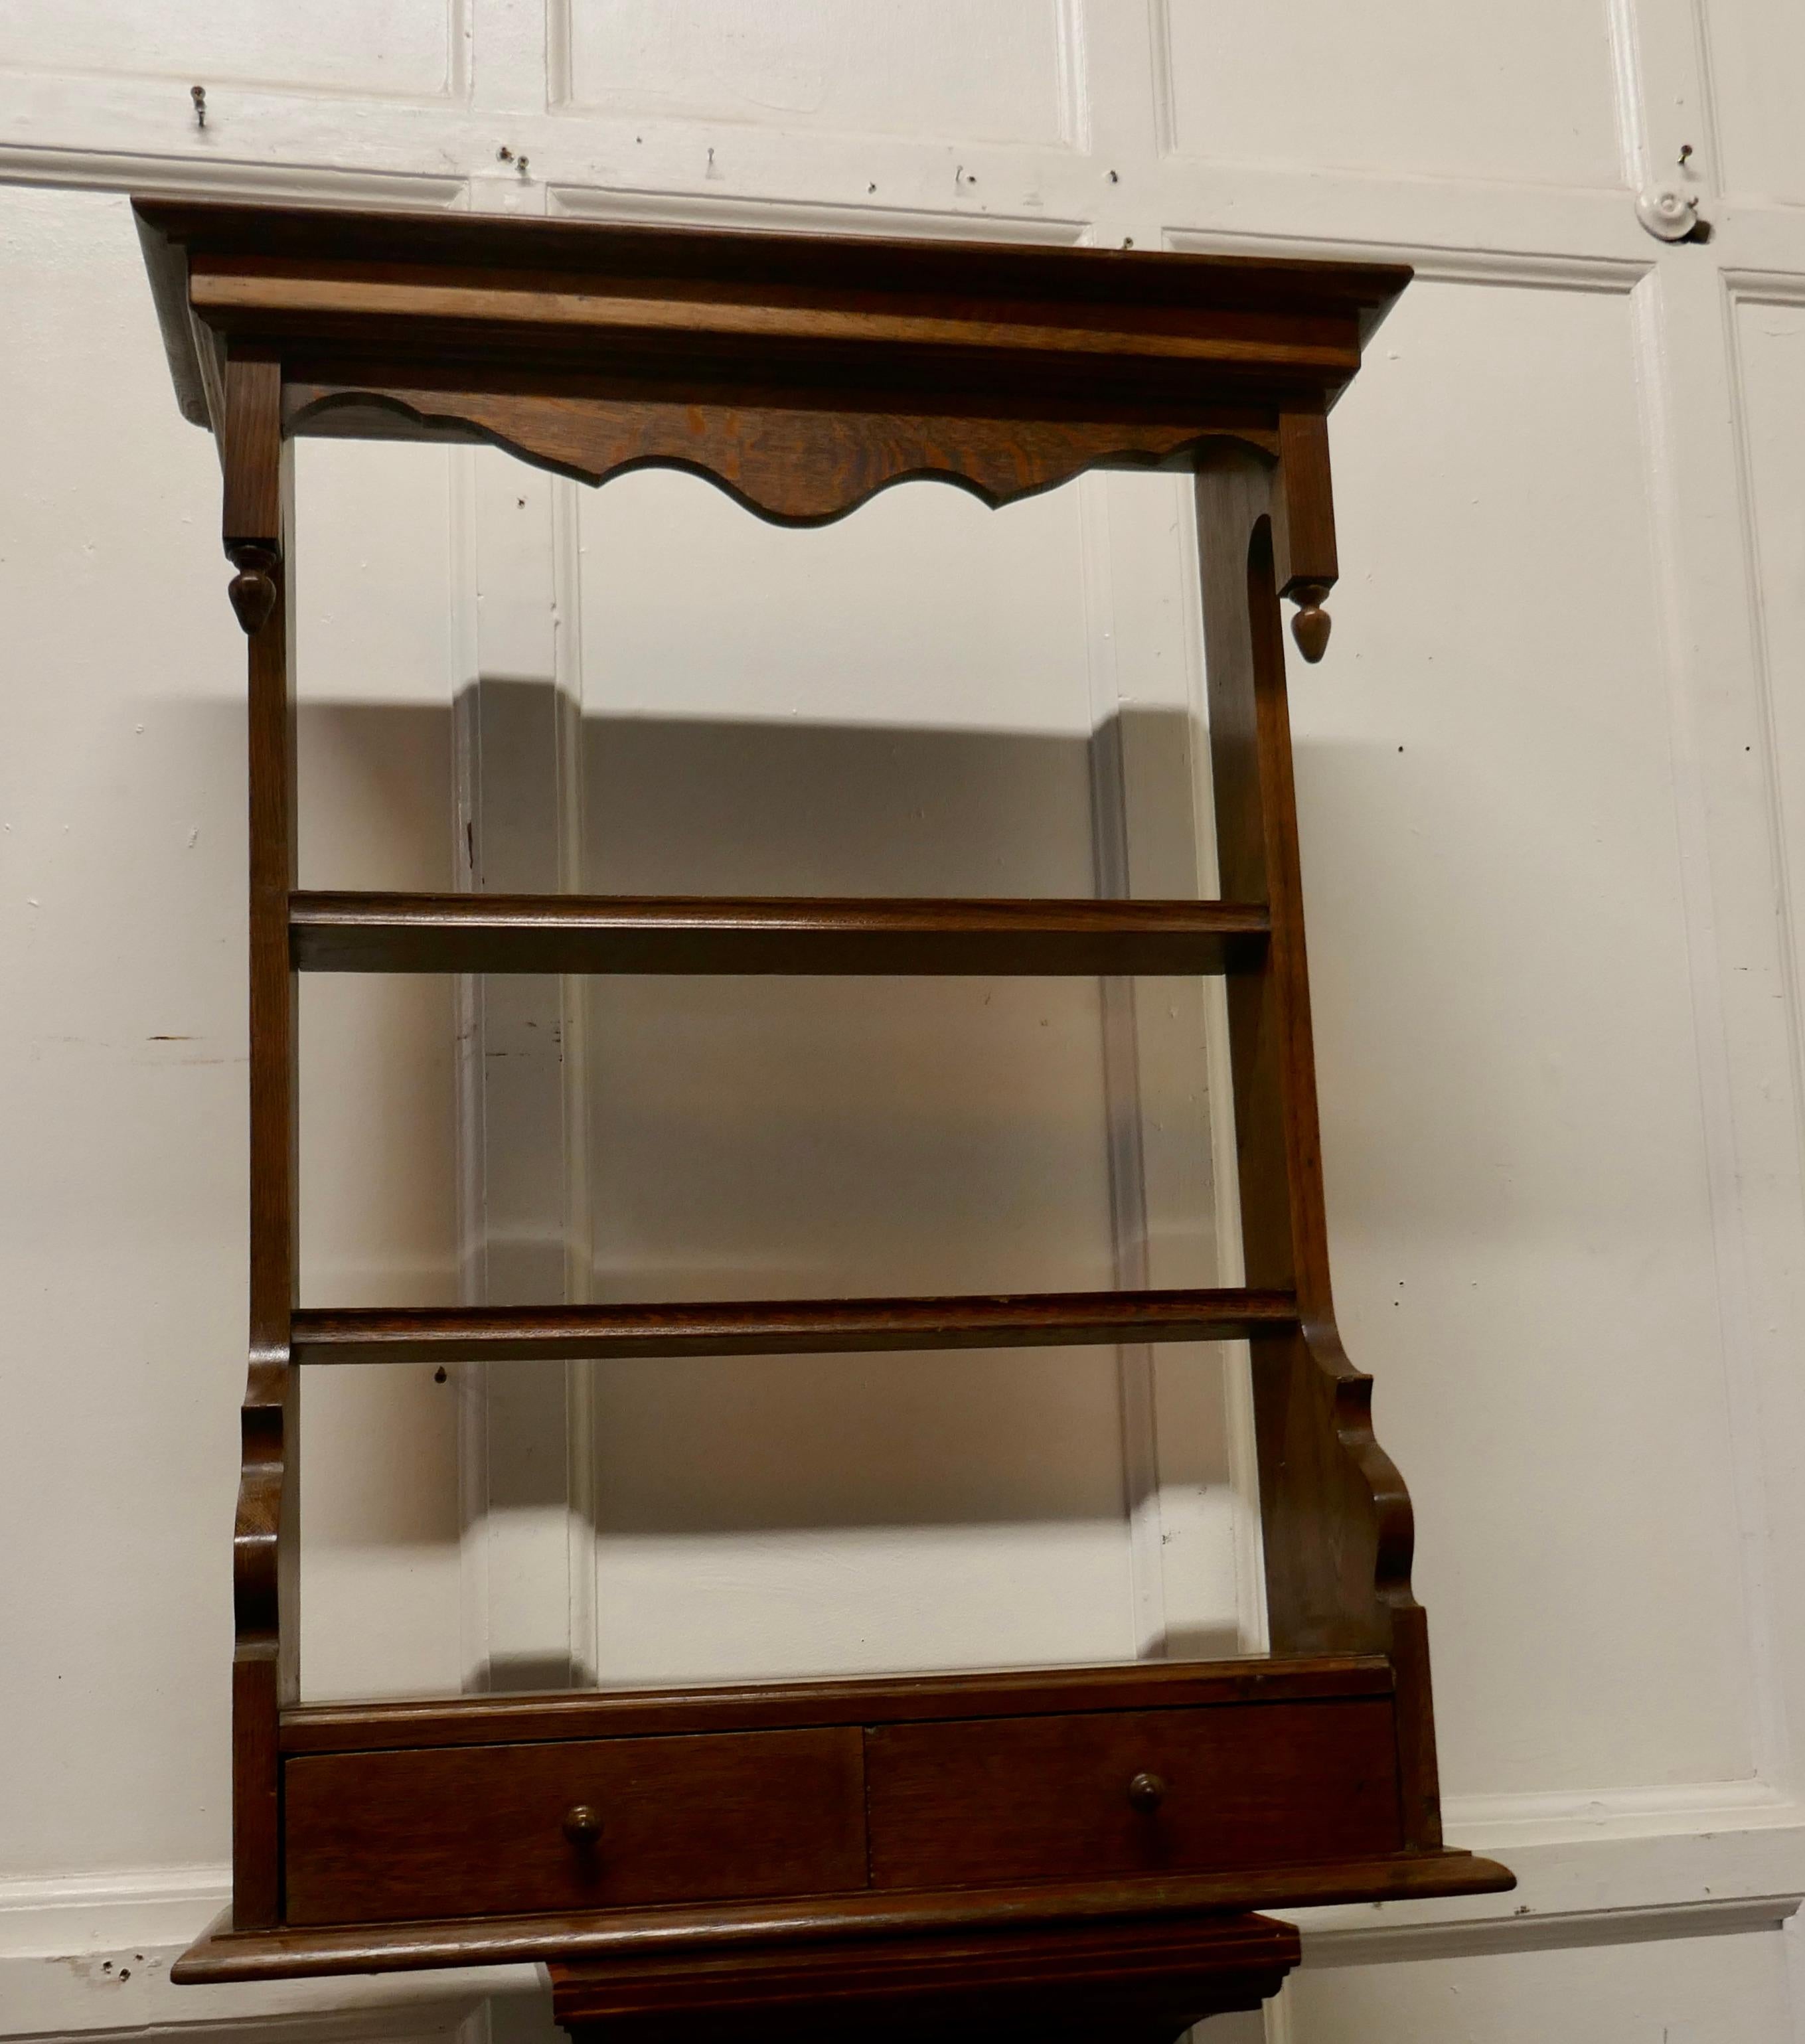 French Country Oak Wall Hanging Shelf with Drawers In Good Condition For Sale In Chillerton, Isle of Wight